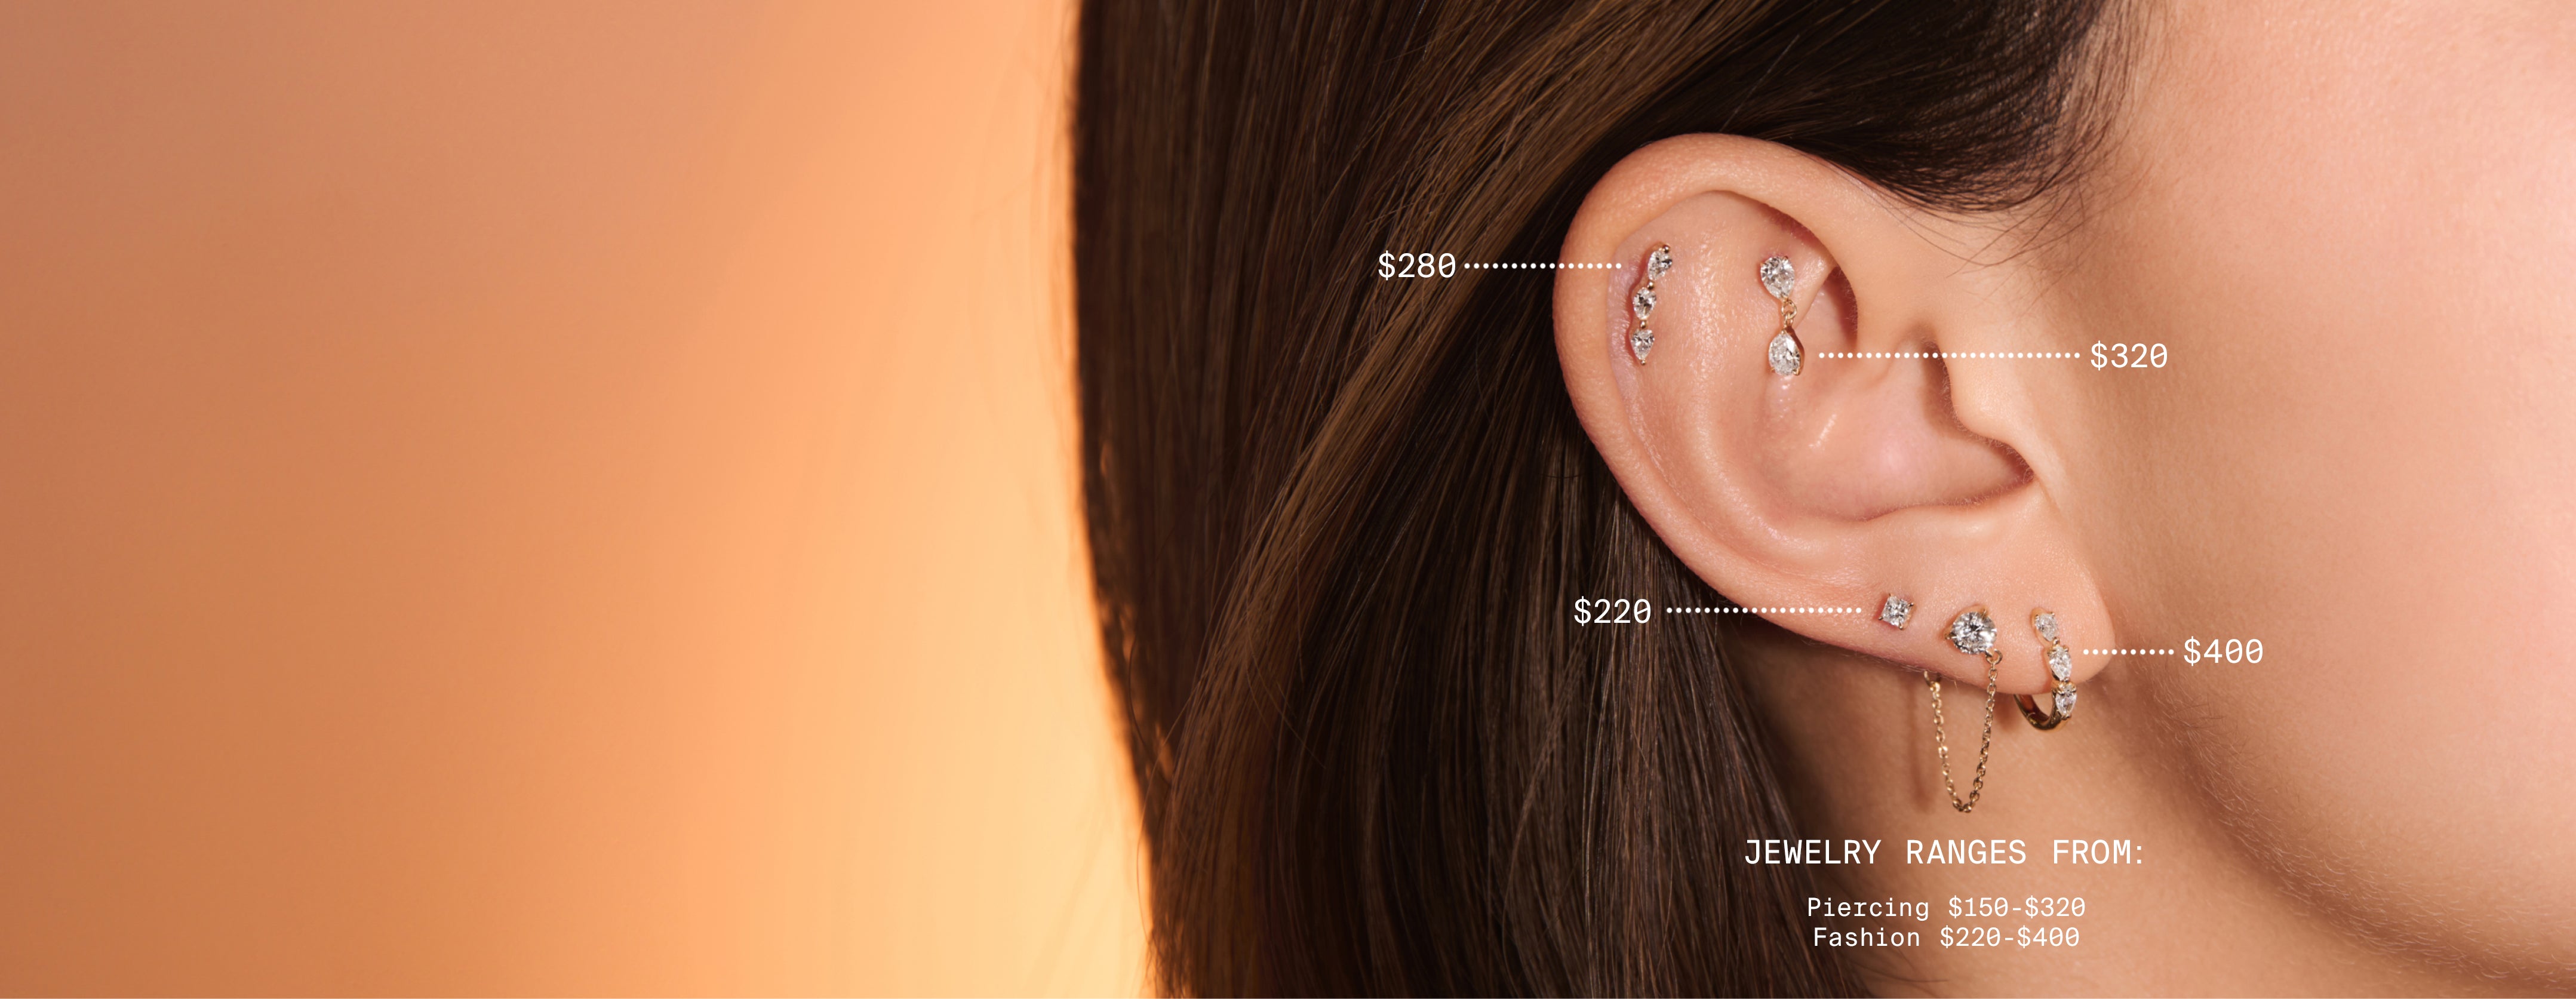 Close-up of an ear adorned with multiple earrings, prices marked for each piece of jewelry.